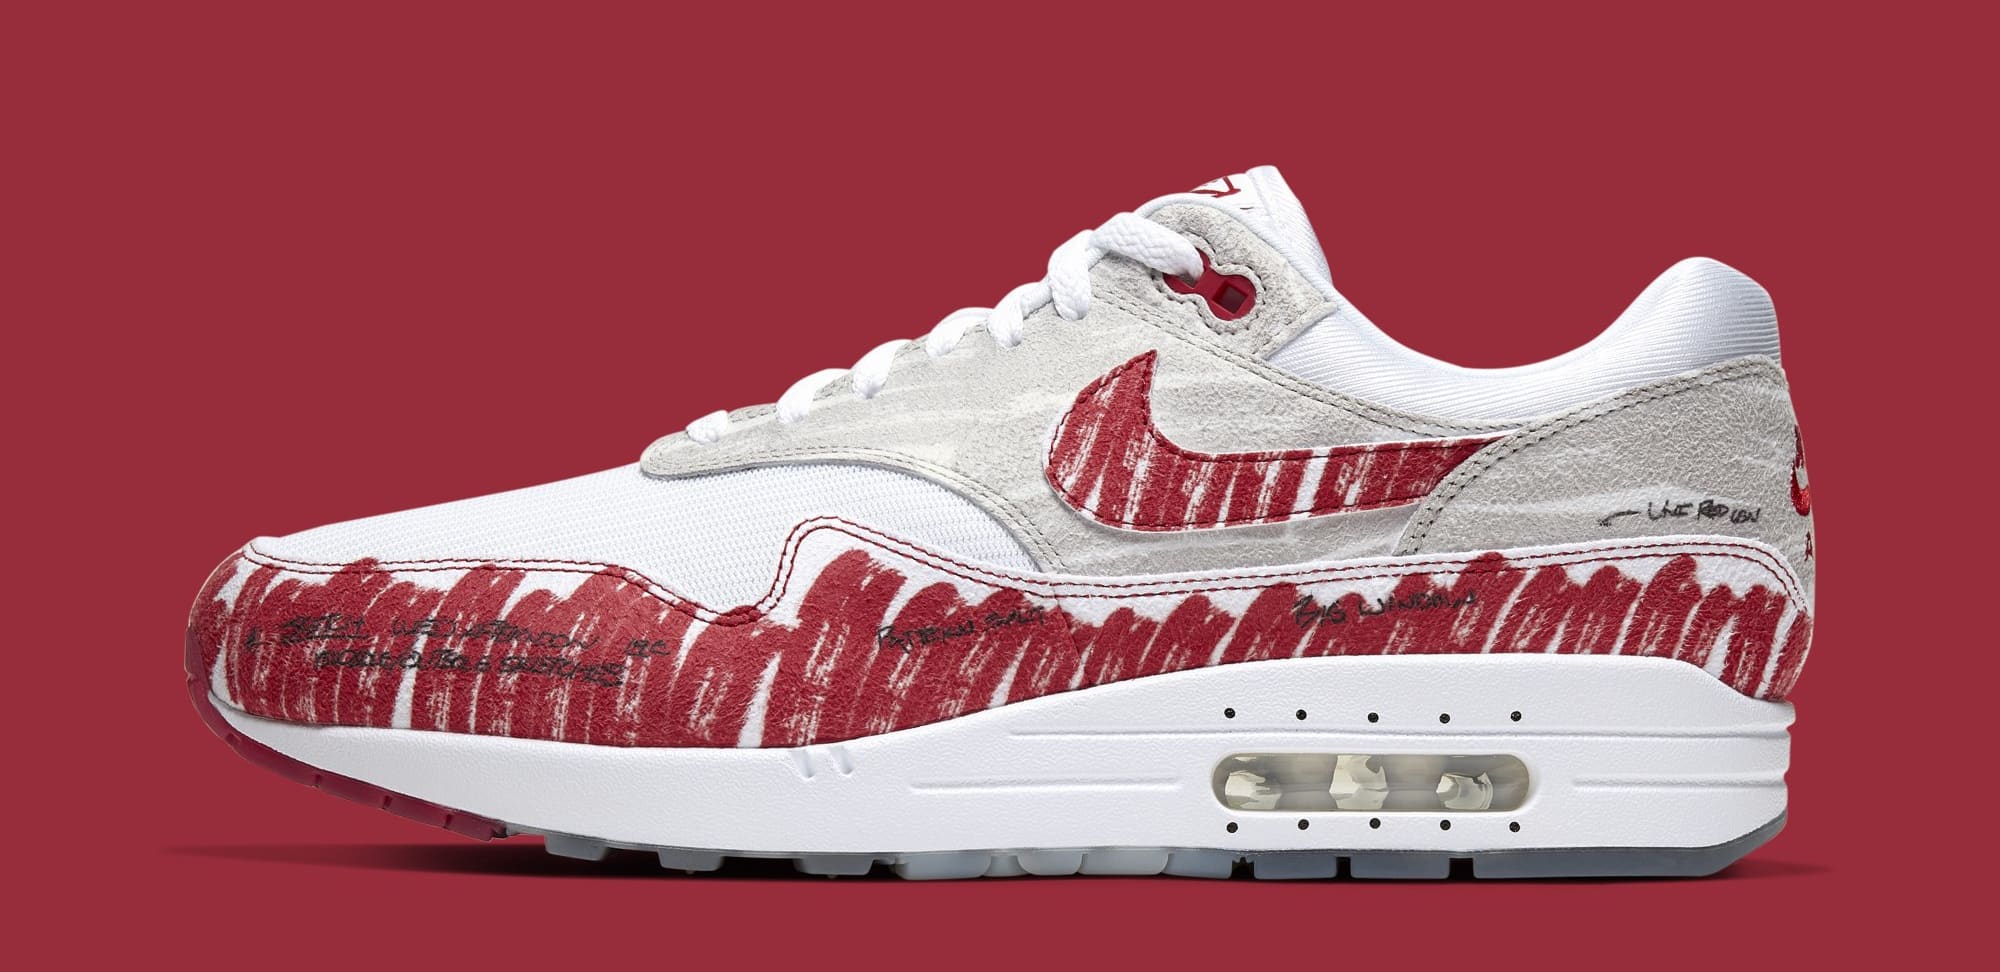 thuis Apt verzoek Best Look Yet at the Air Max 1s Inspired by Tinker Hatfield's Sketch |  Complex